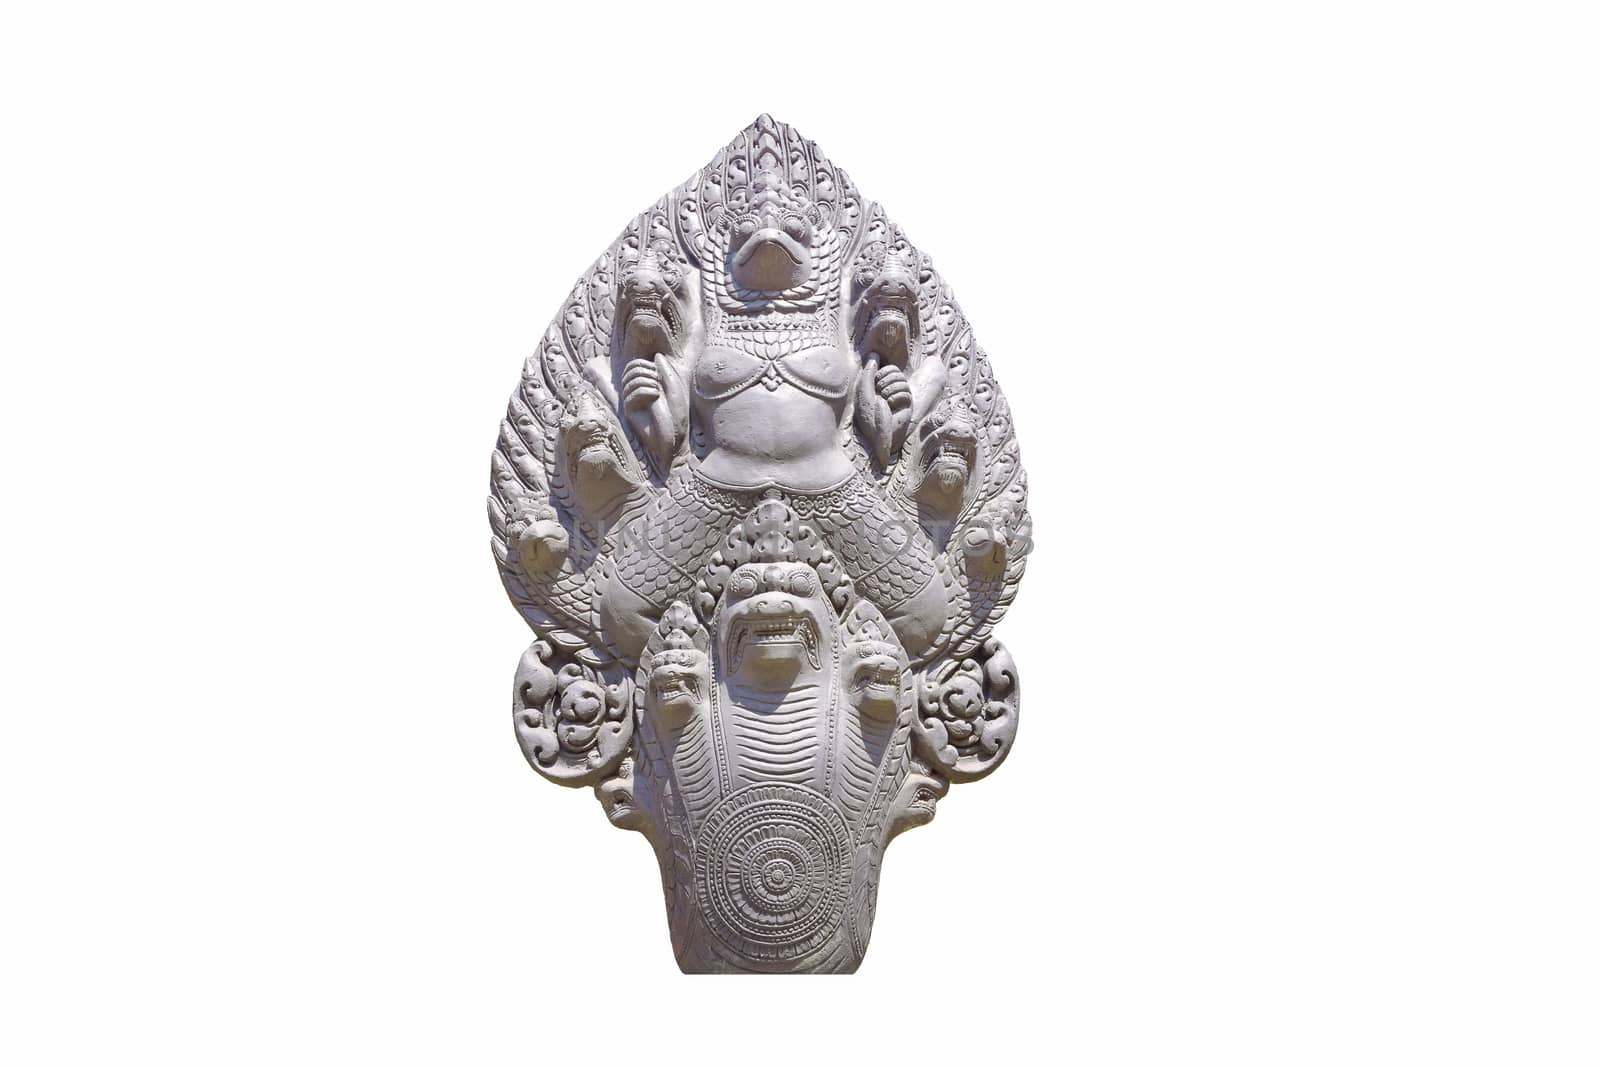 Isolated Garuda surrounded by serpent heads on this naga balustr by orsor